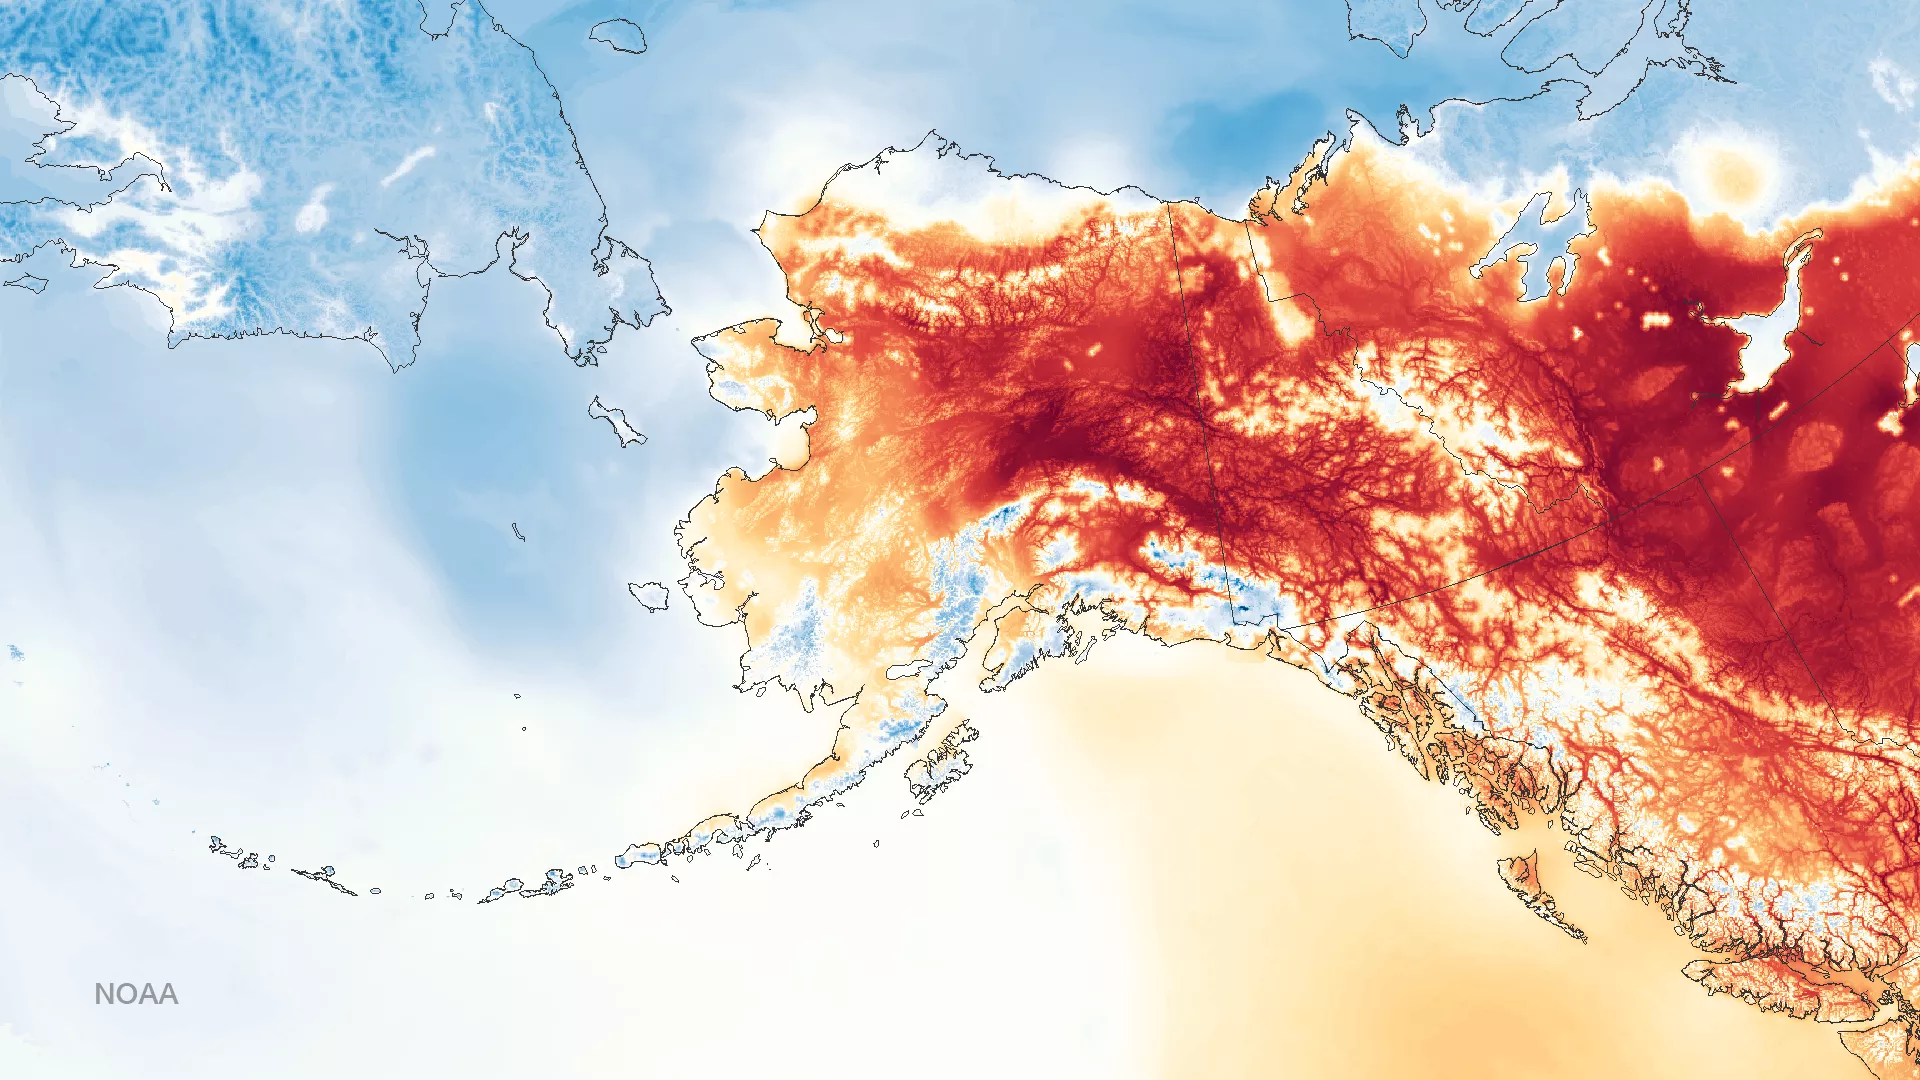 This image shows the surface air temperature from 23:00z on May 23, 2015 using NOAA's Real-time Mesoscale Analysis model (RTMA). The warmest temperatures are colored orange-red, colder colors are colored blue. The RTMA uses surface observation data from several sources, including NOAA polar-orbiting satellites, to create a highly accurate gridded analysis of past weather conditions.